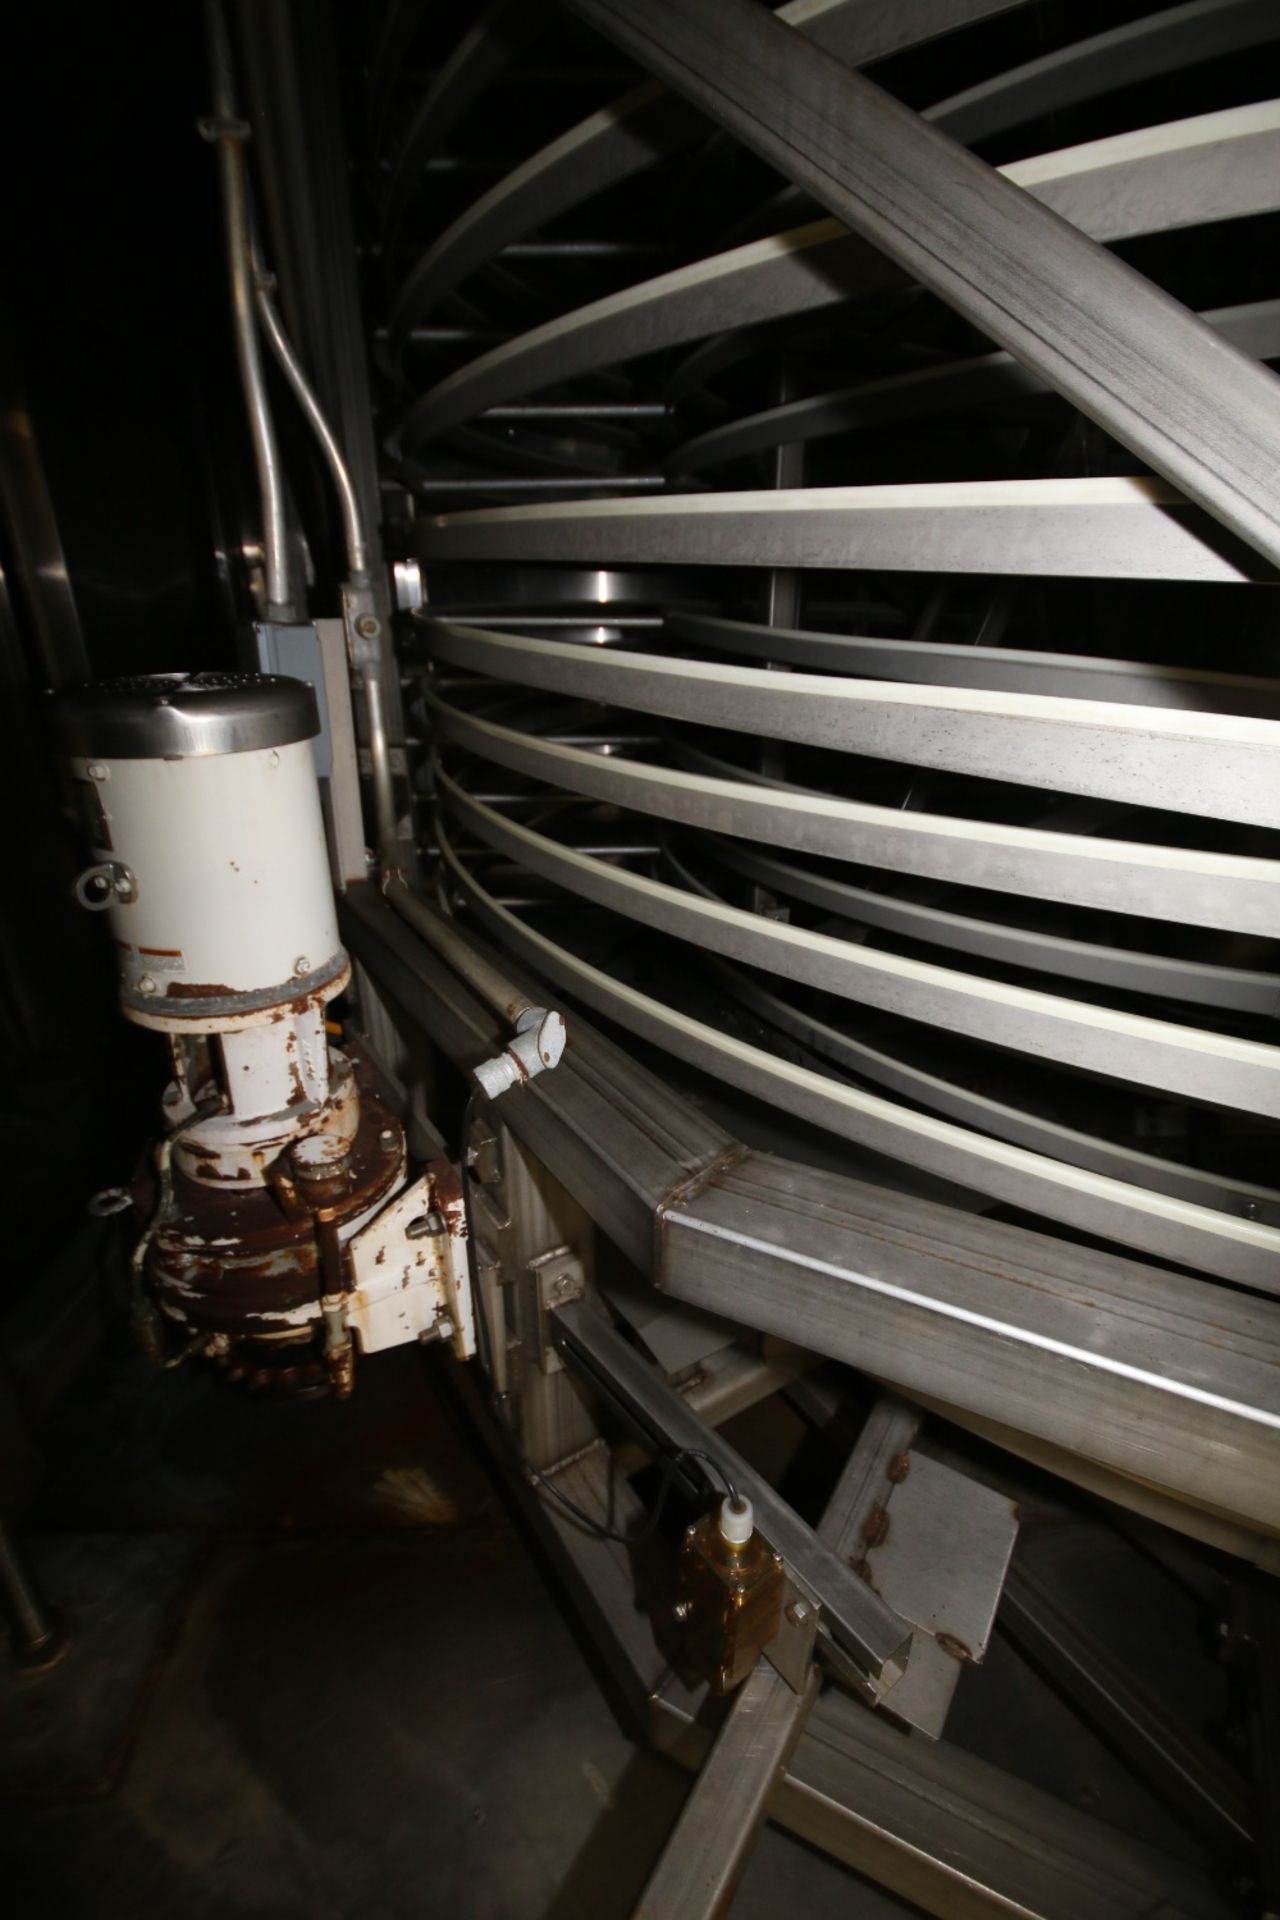 I.J. White System Spiral Freezer, with 17-Tiers, Aprox. 2-1/2” Deck Spacing, Frame Dims.: 9’9” H x - Image 3 of 6